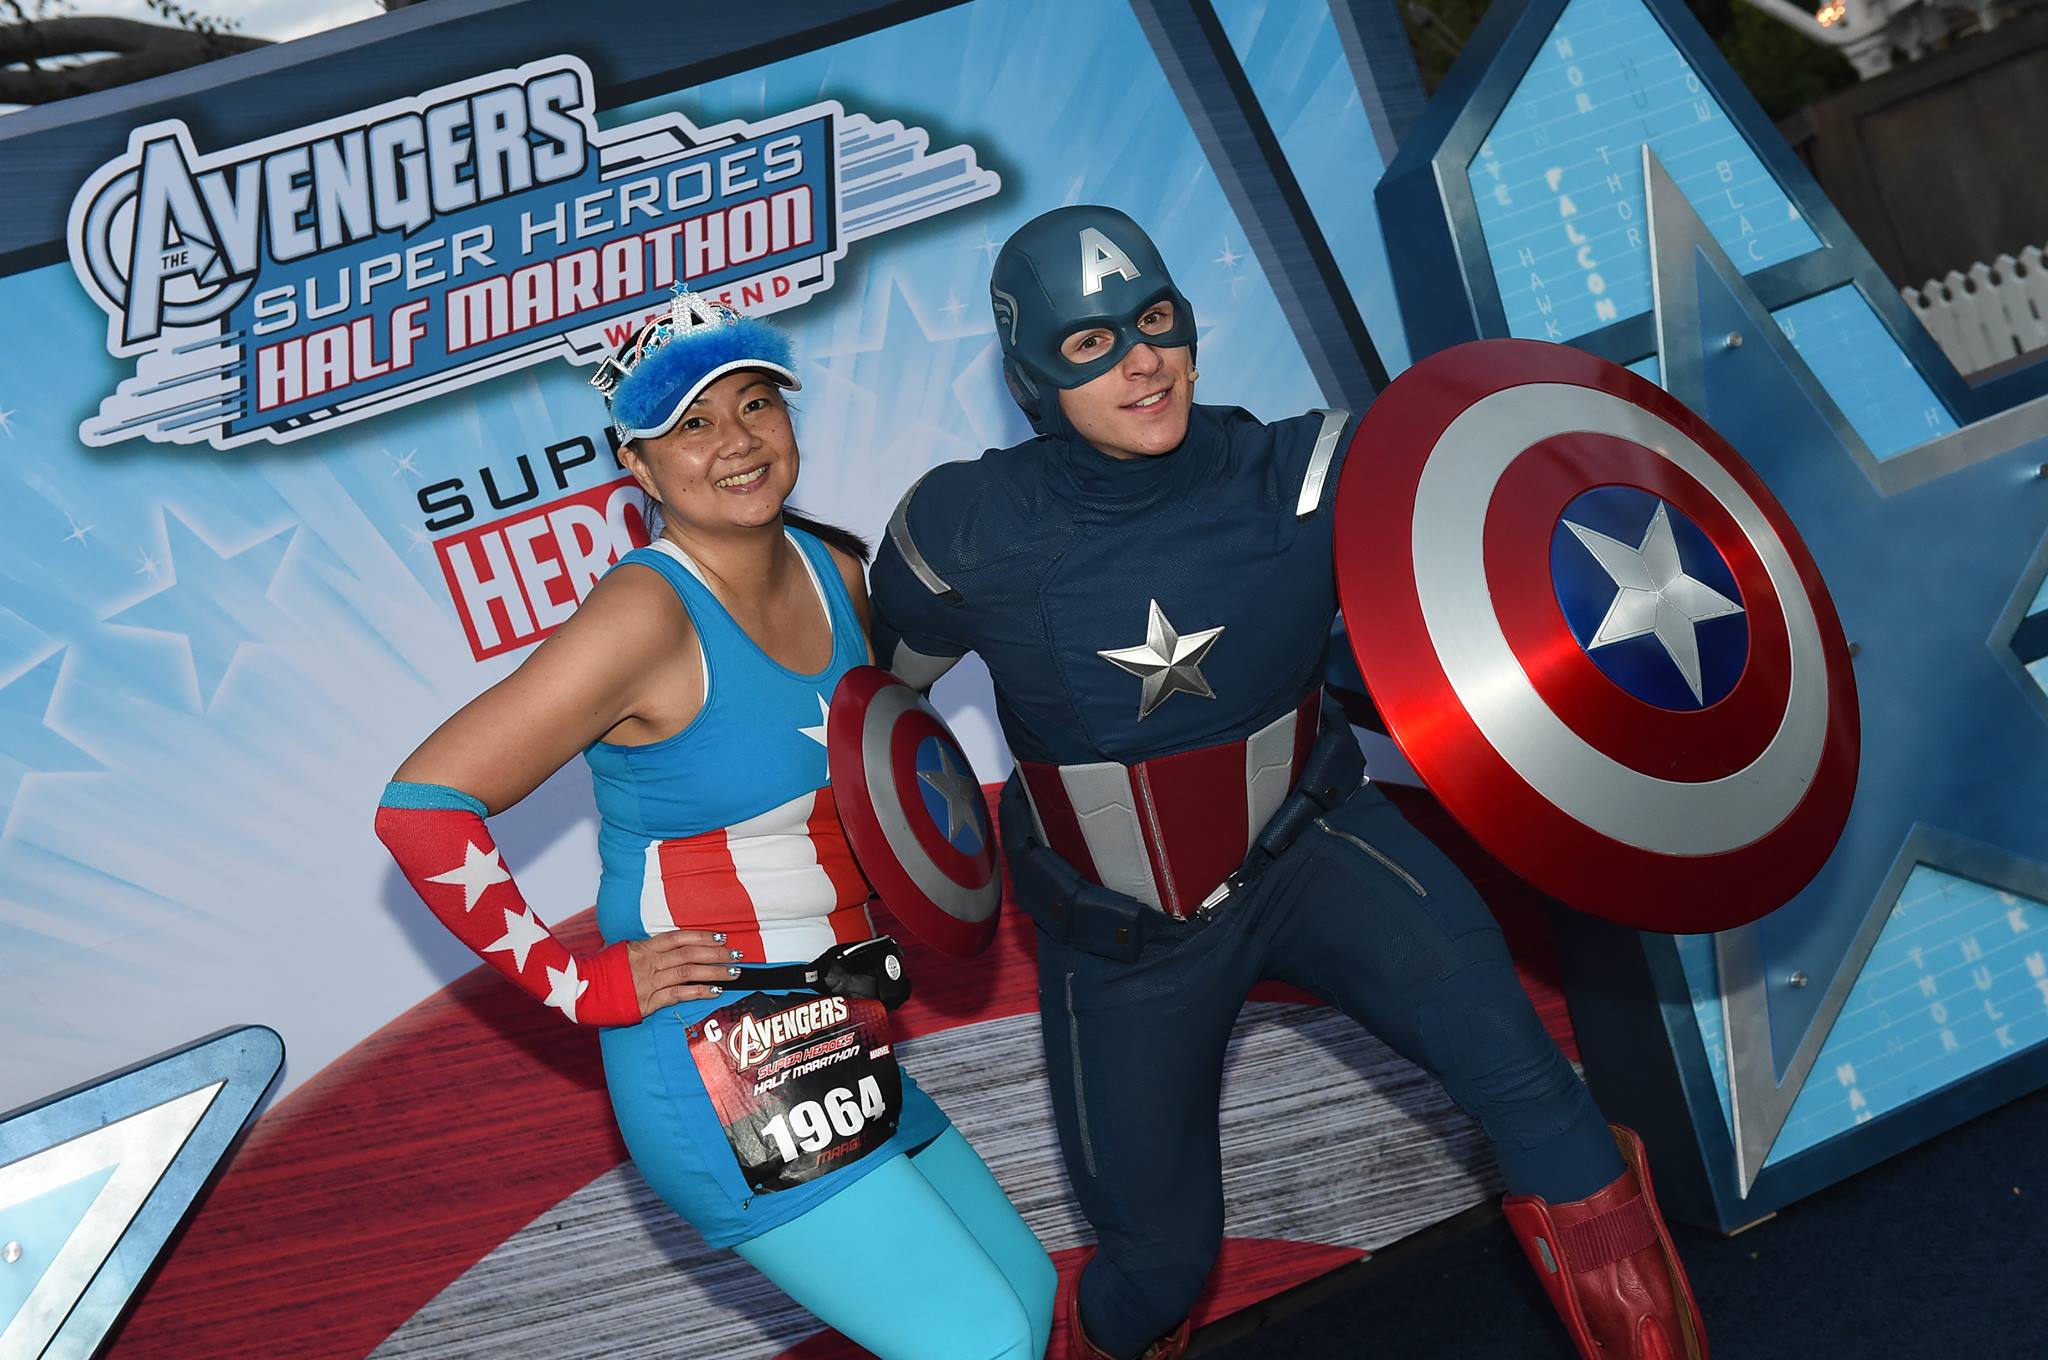 Avengers Join Forces with More Heroes for the runDisney Super Heroes Half Marathon Weekend at the Disneyland Resort